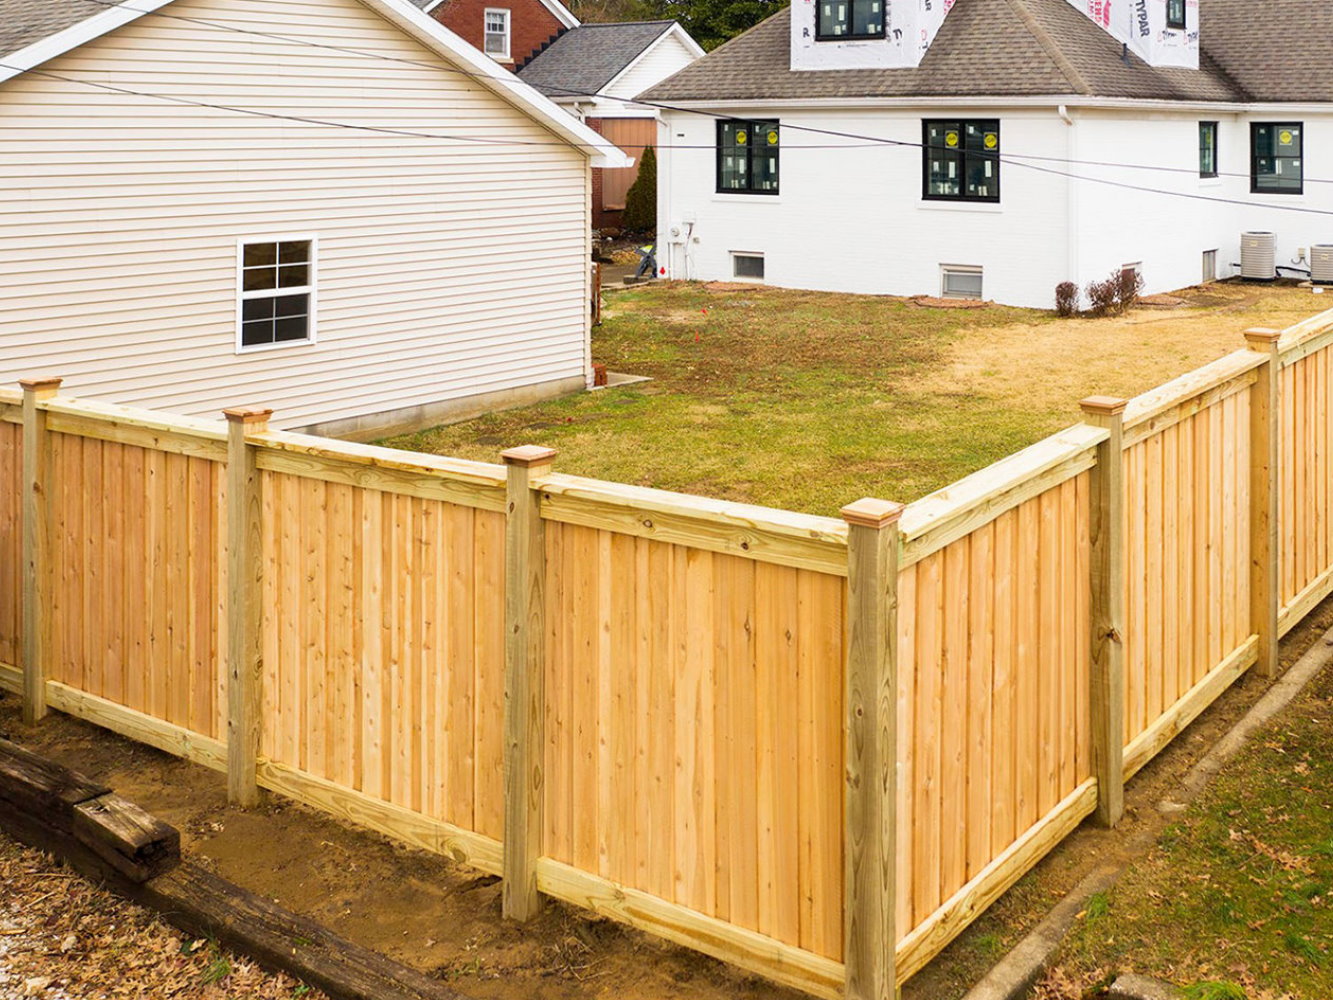 Morganfield KY cap and trim style wood fence